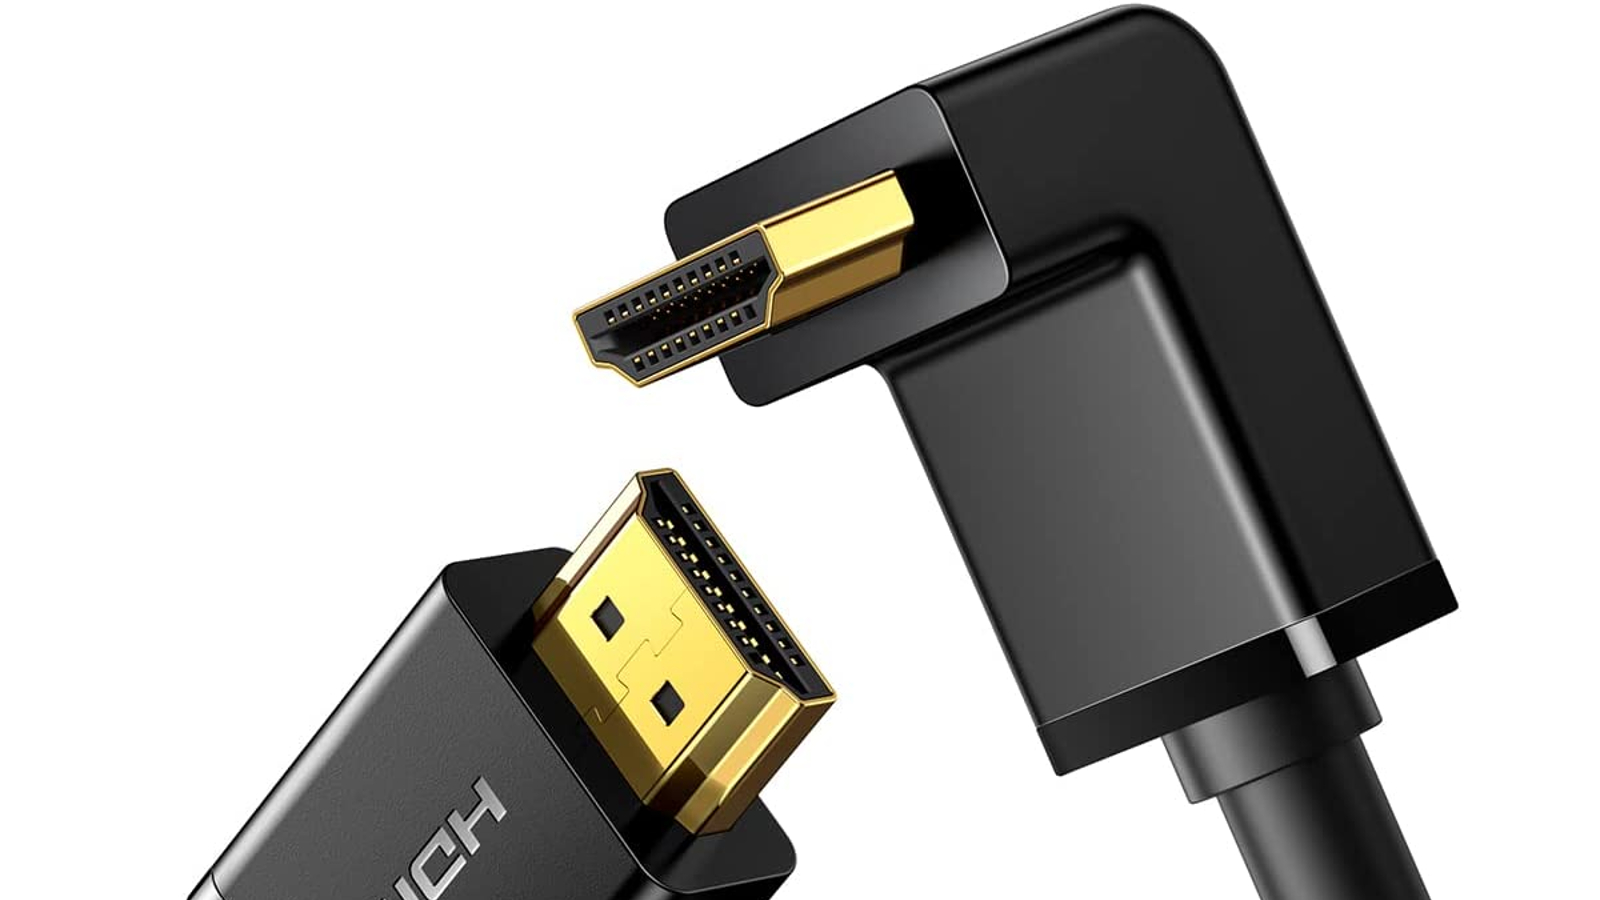 UGreen 90-Degree HDMI Cable - Best HDMI cable for tight spaces